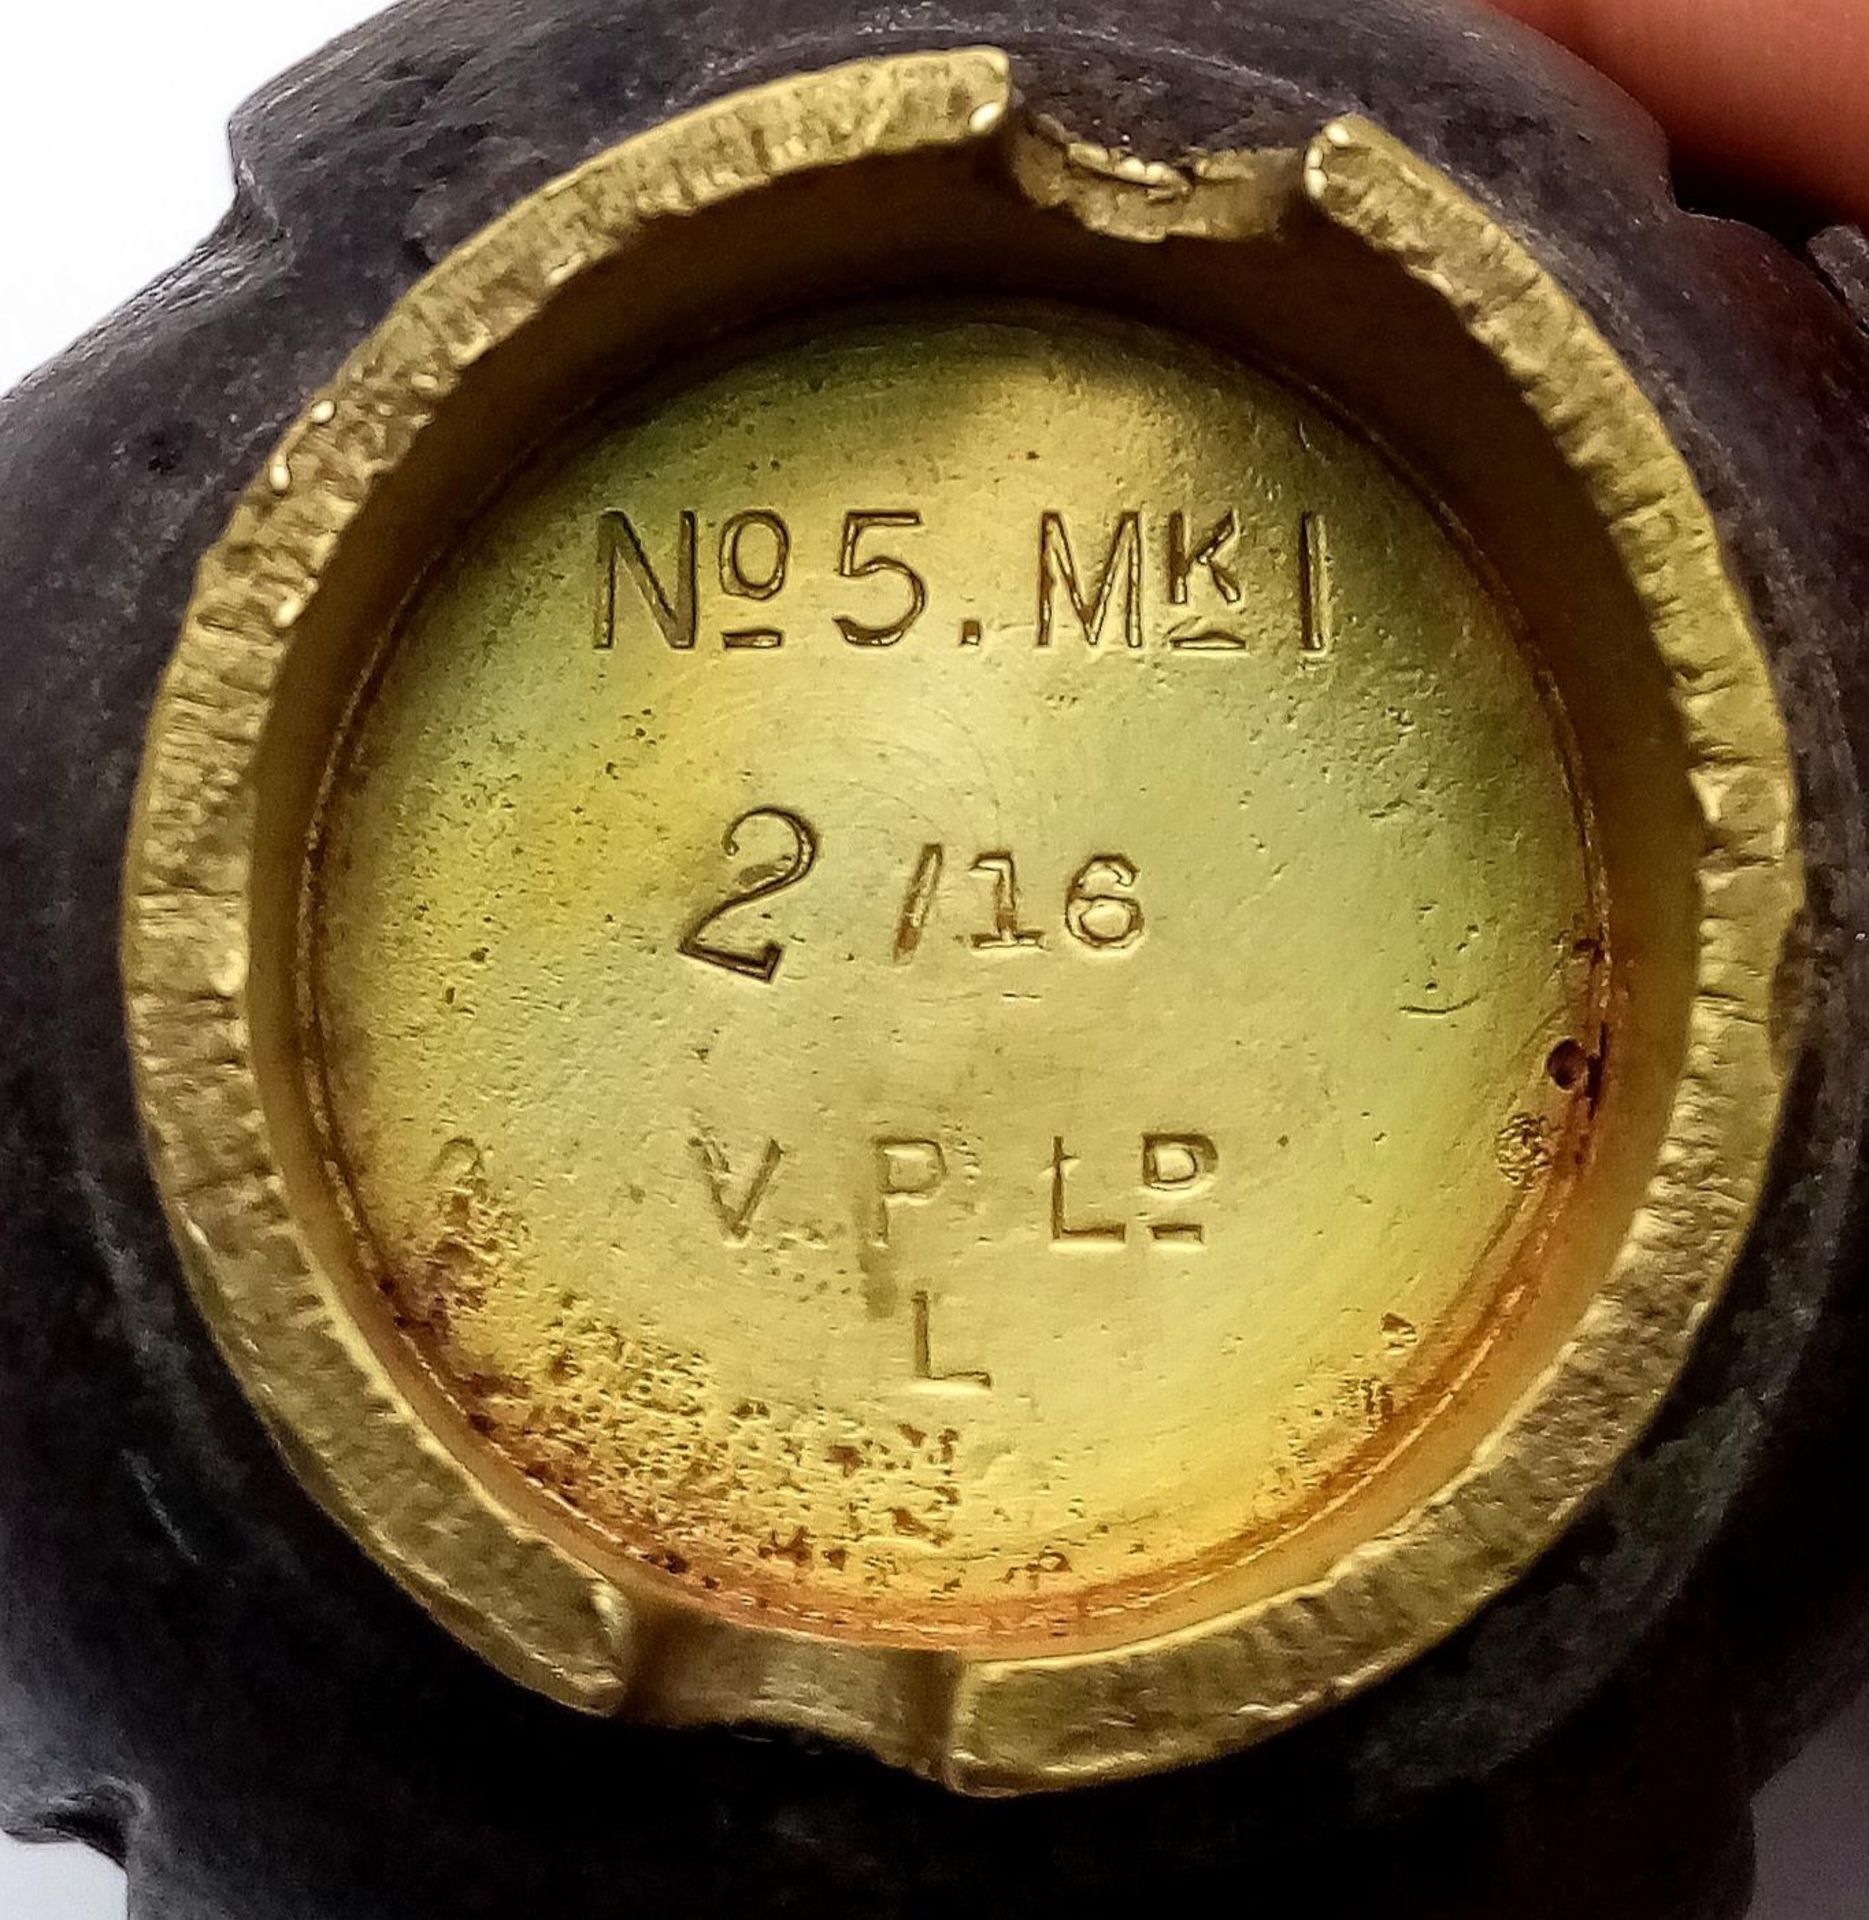 INERT WW1 No 5 Mills Hand Grenade Dated Feb 1916. Great condition for its age. Maker Vickerys - Image 5 of 5